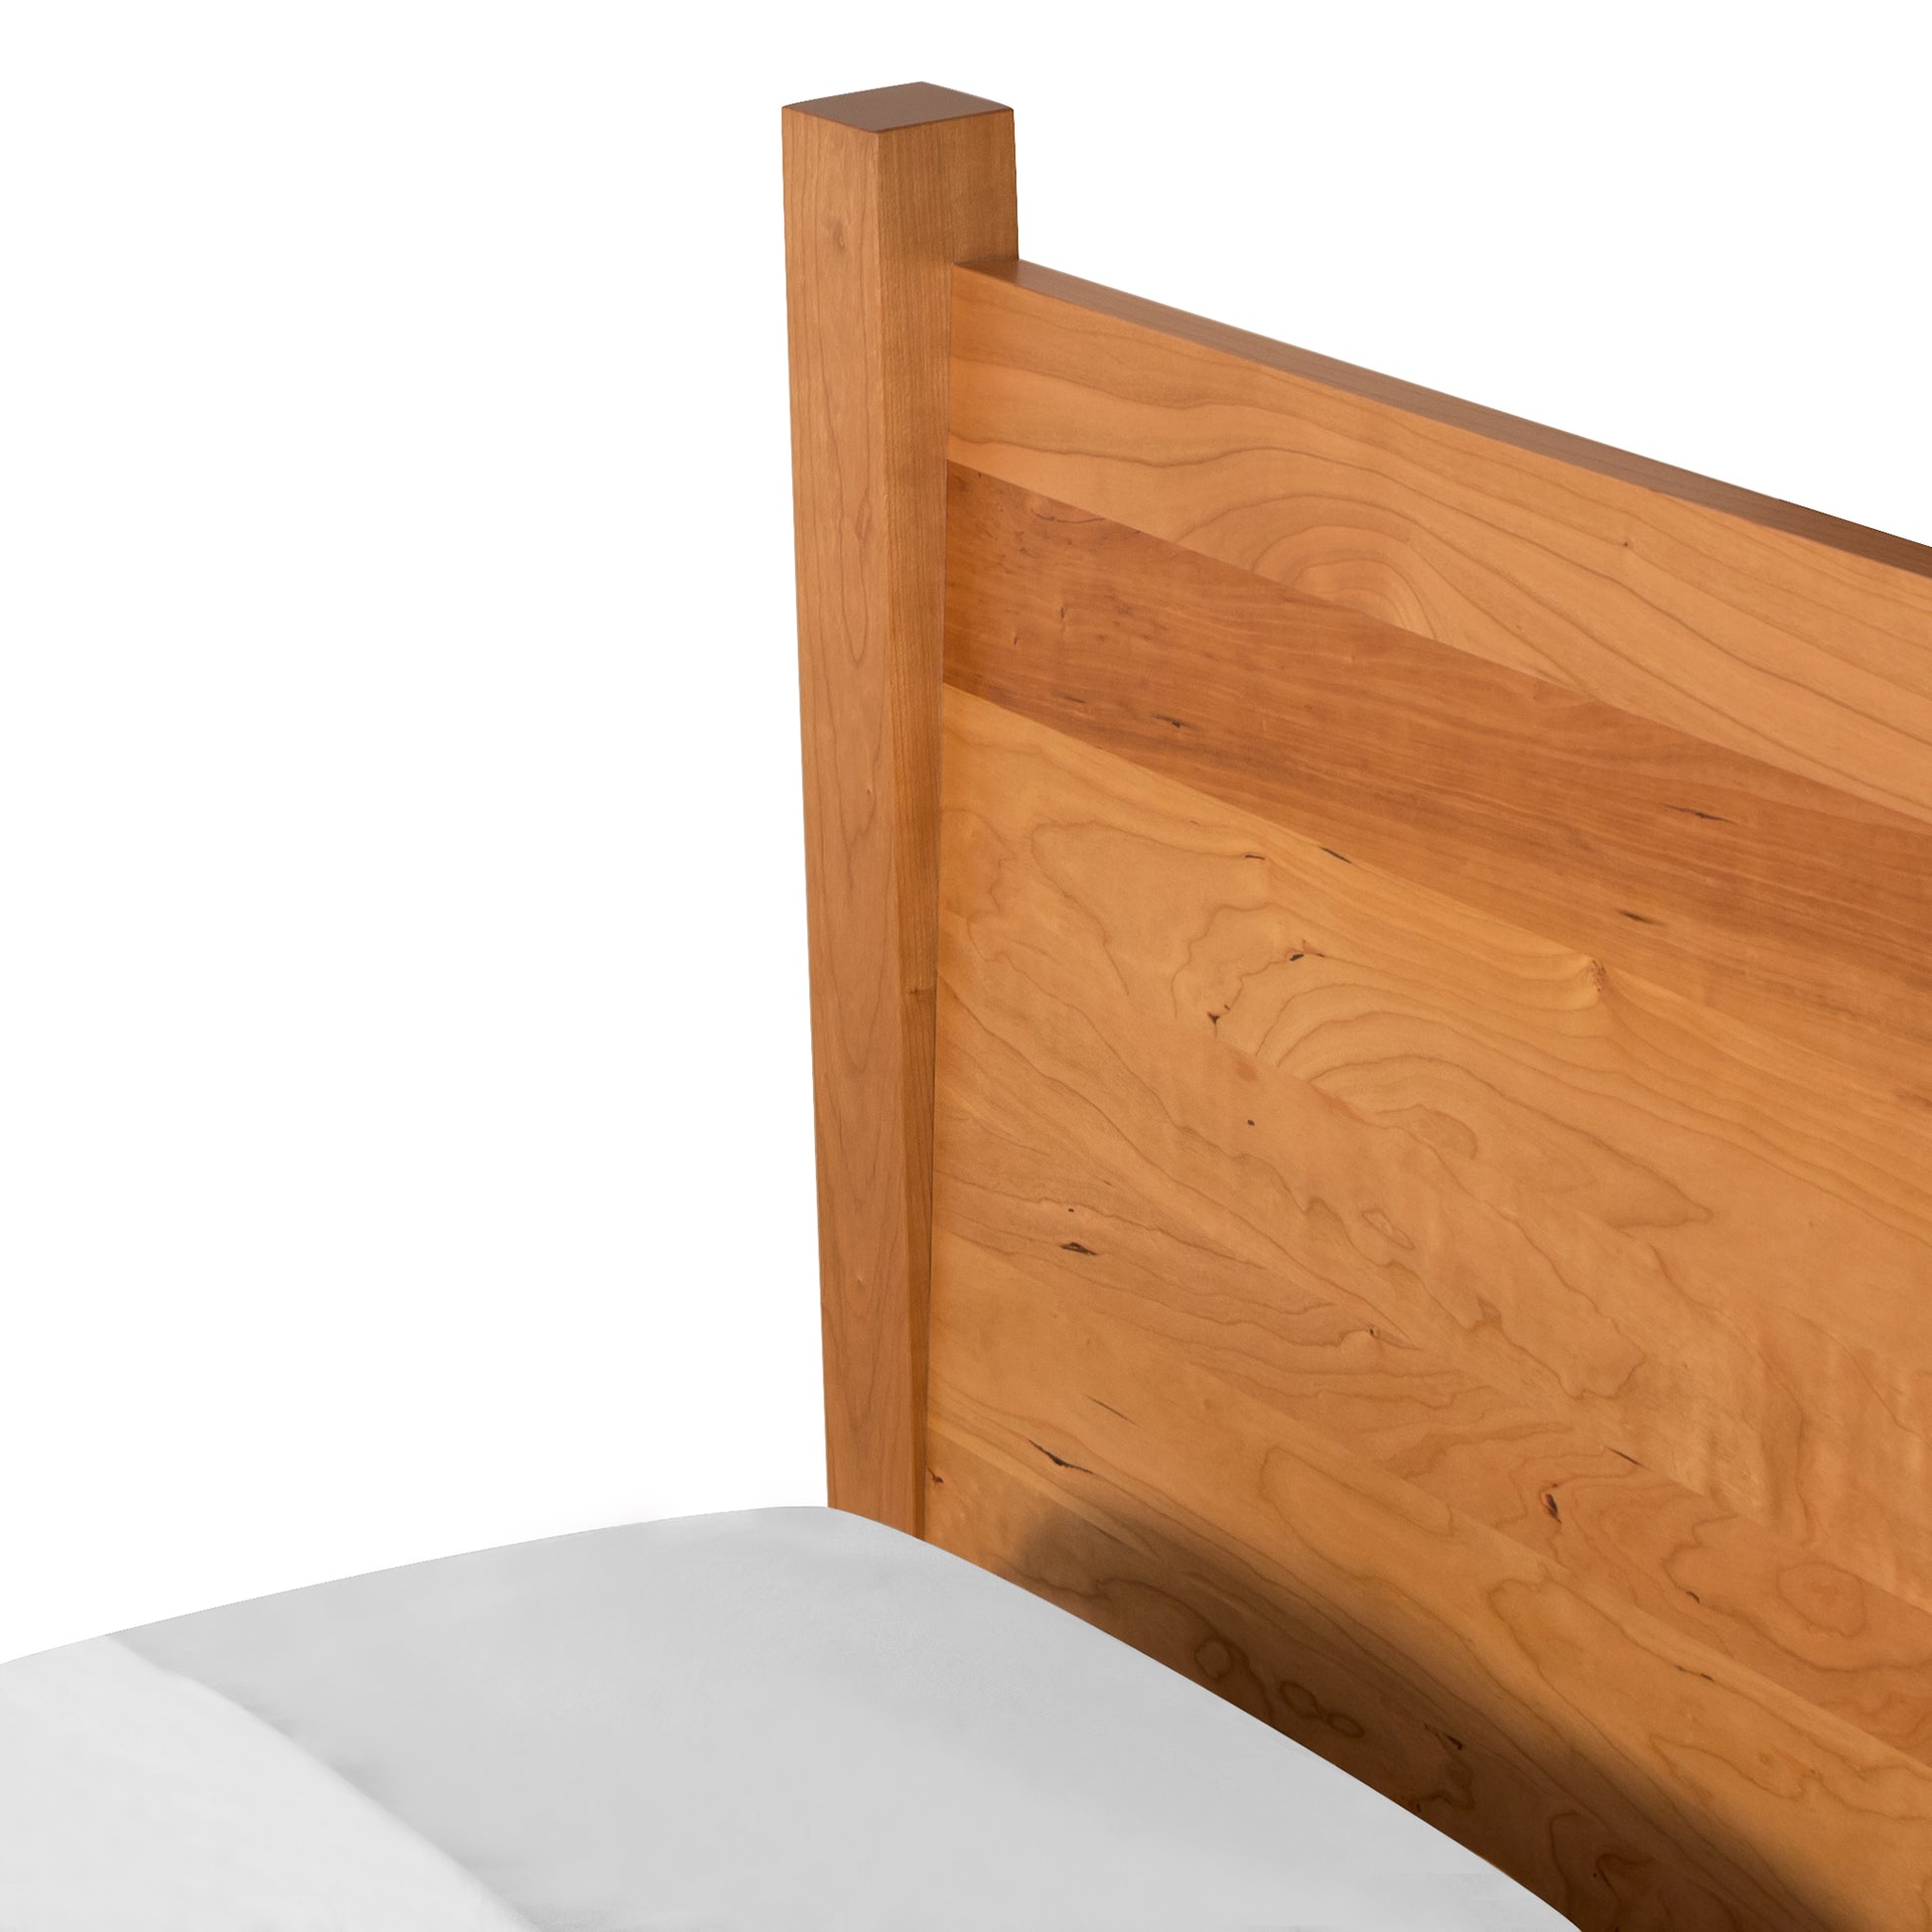 A close-up view of a Lyndon Furniture Classic Wood Bed - Queen - Display Model corner and a portion of a white mattress, set against a white background.